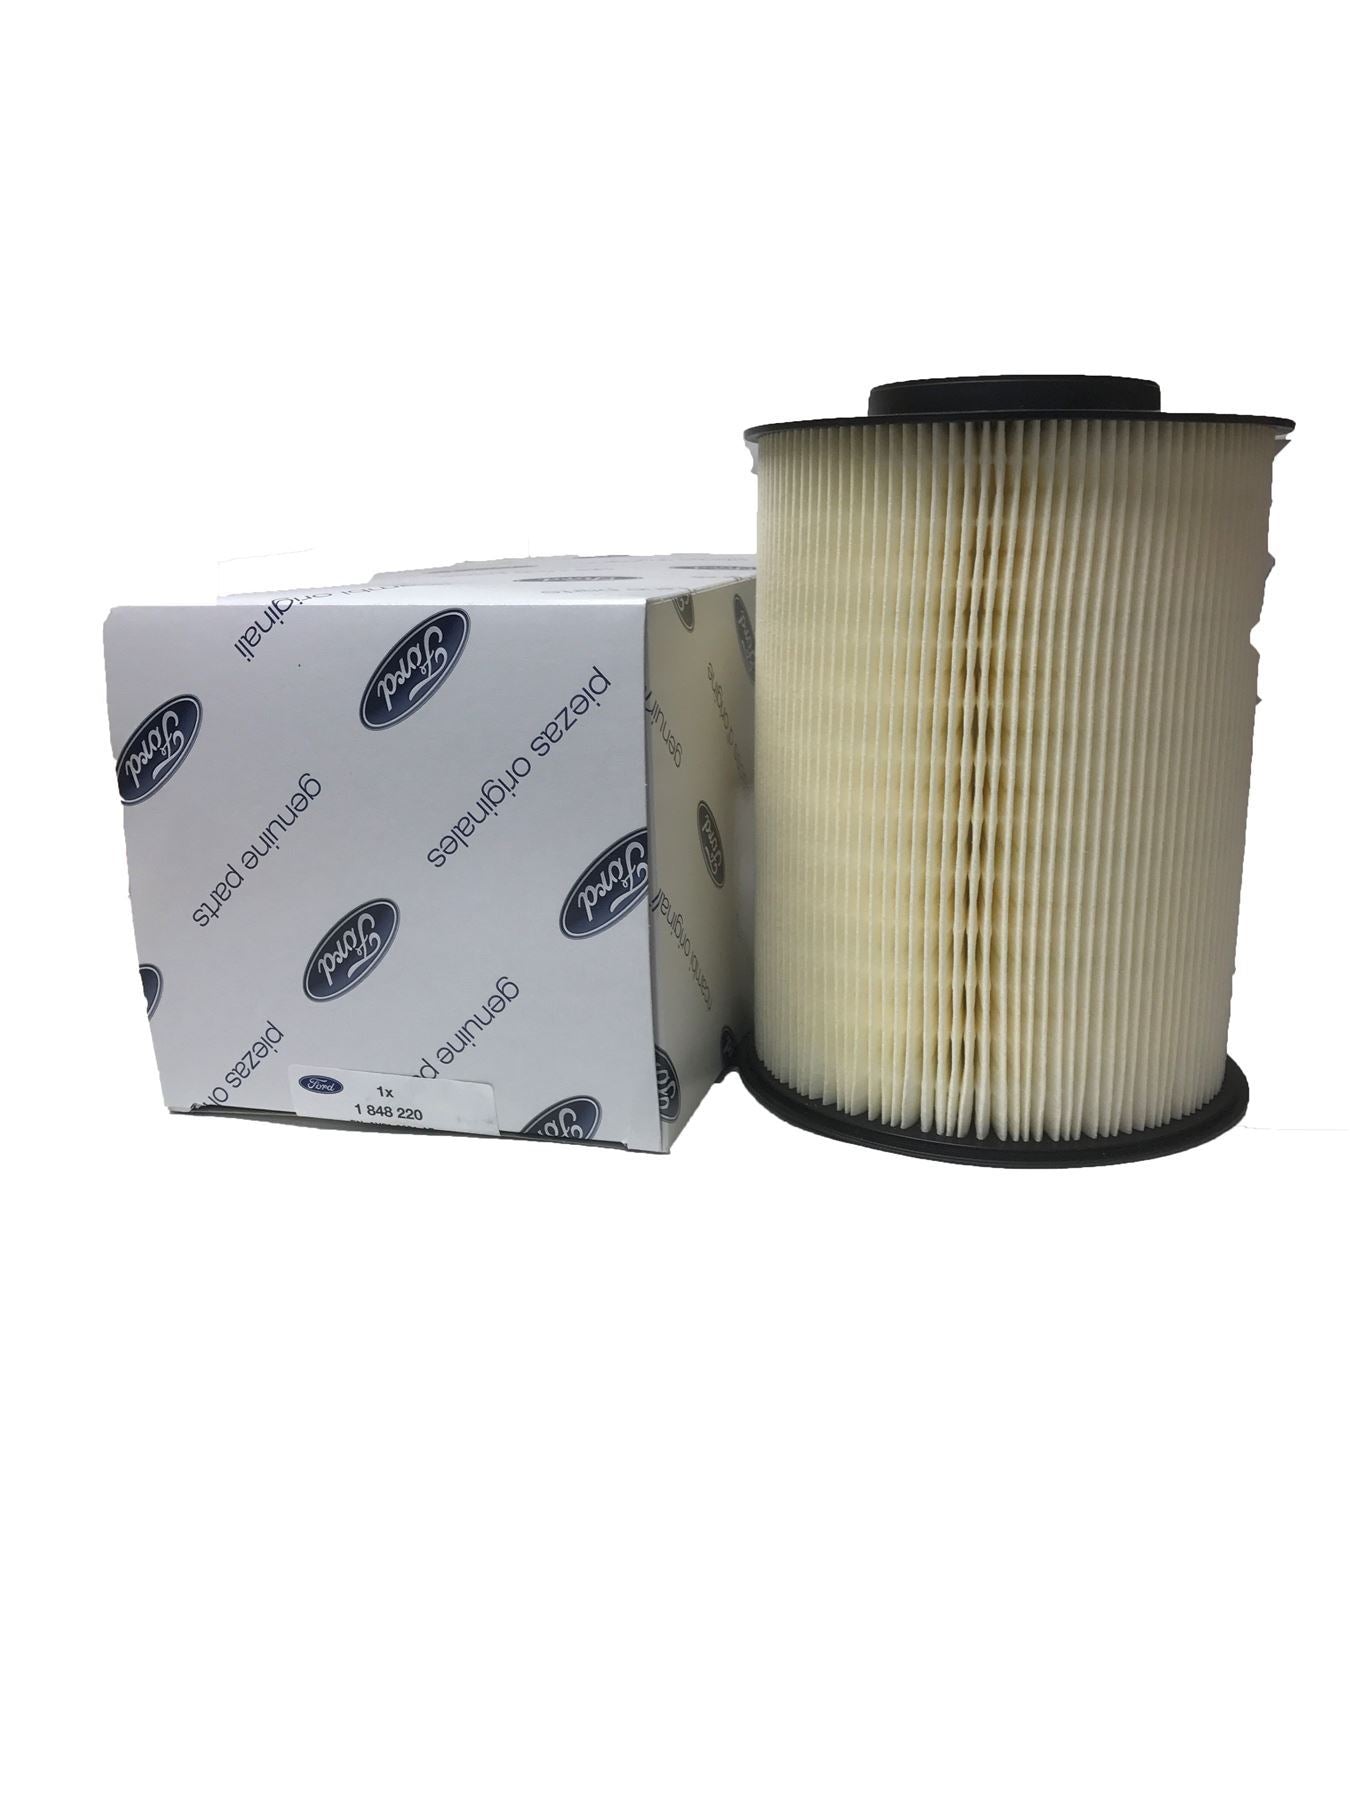 GENUINE FORD FOCUS Saloon 2.0 TDCi 11.14 - 150HP ROUND TYPE AIR FILTER 1848220